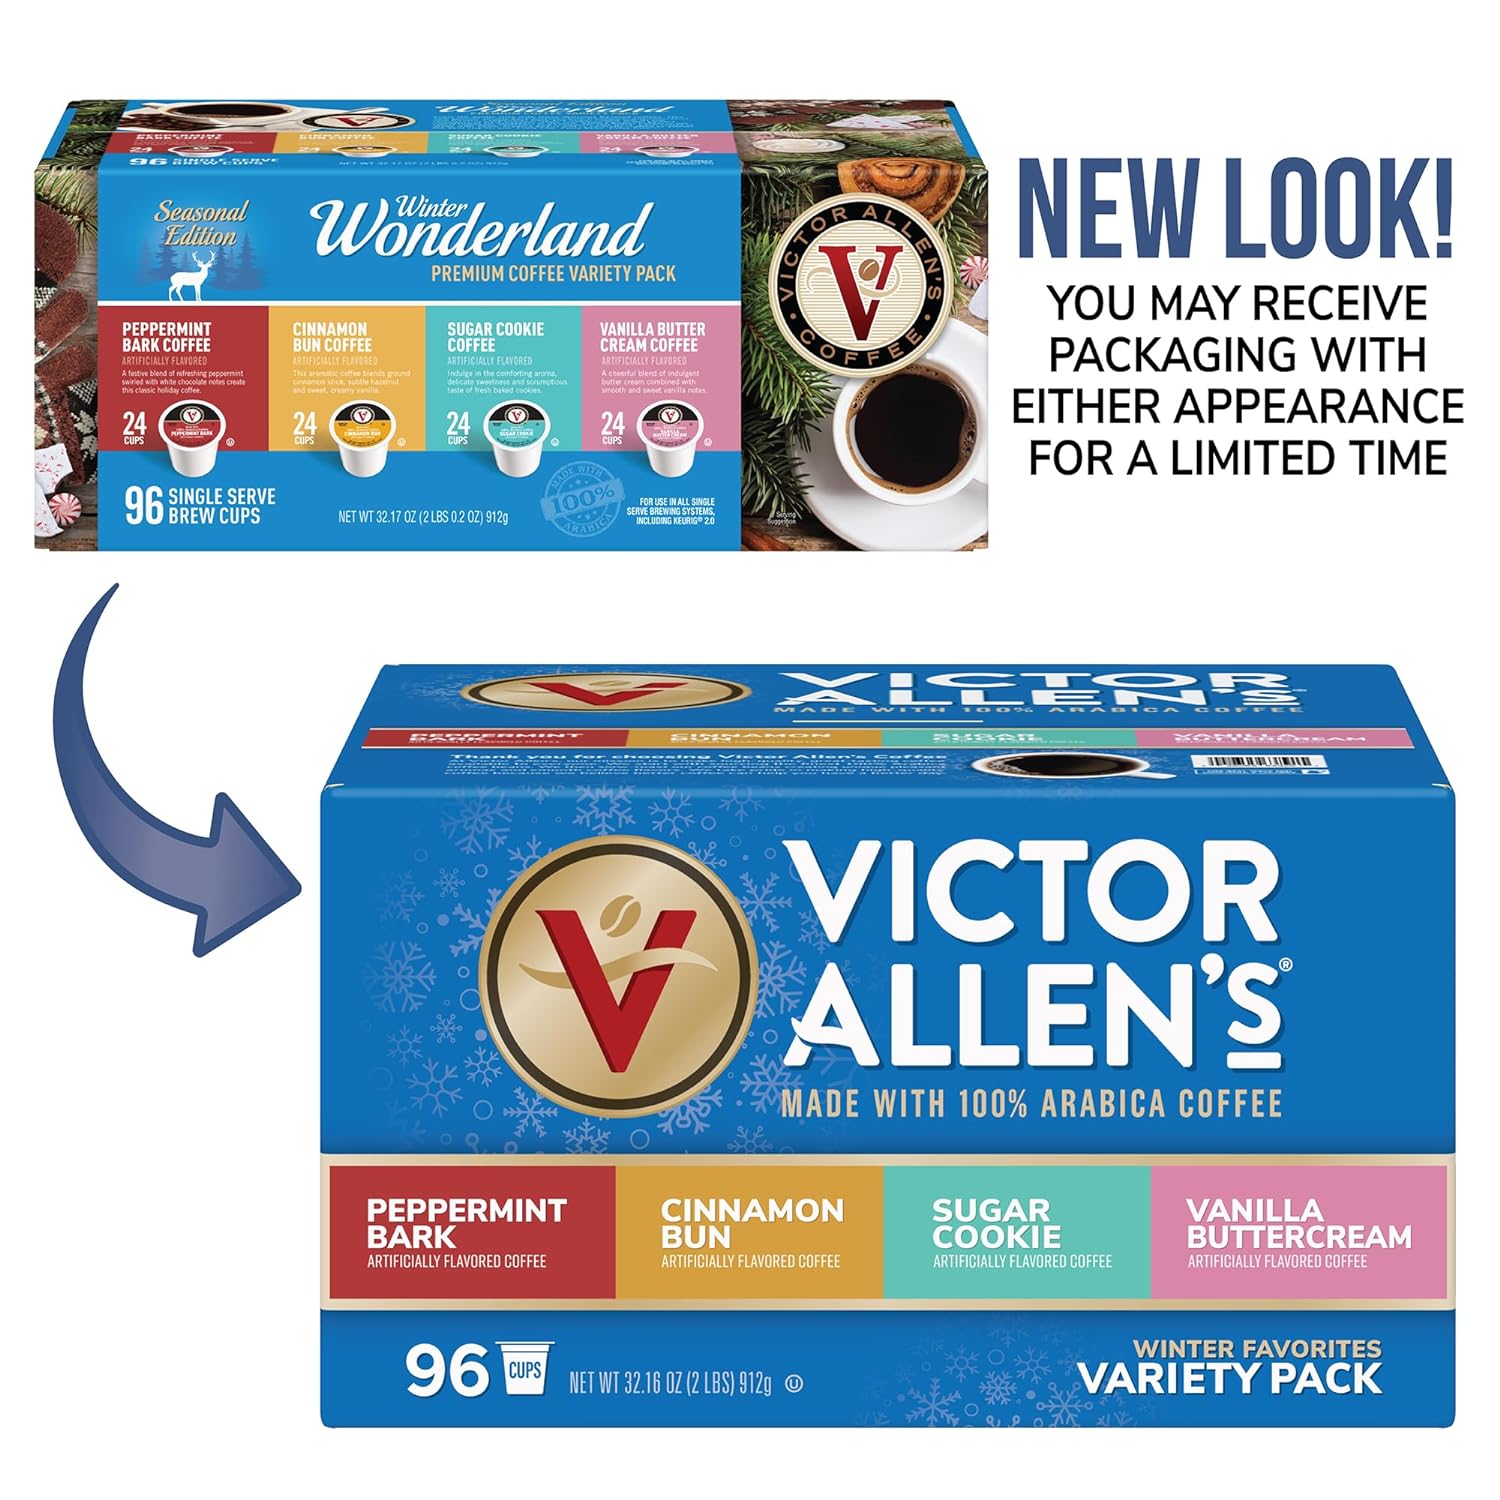 Victor Allens Coffee Variety Pack (Morning Blend, 100% Colombian, Donut Shop Blend, and Italian Roast), 80 Count, Single Serve Coffee Pods for Keurig K-Cup Brewers